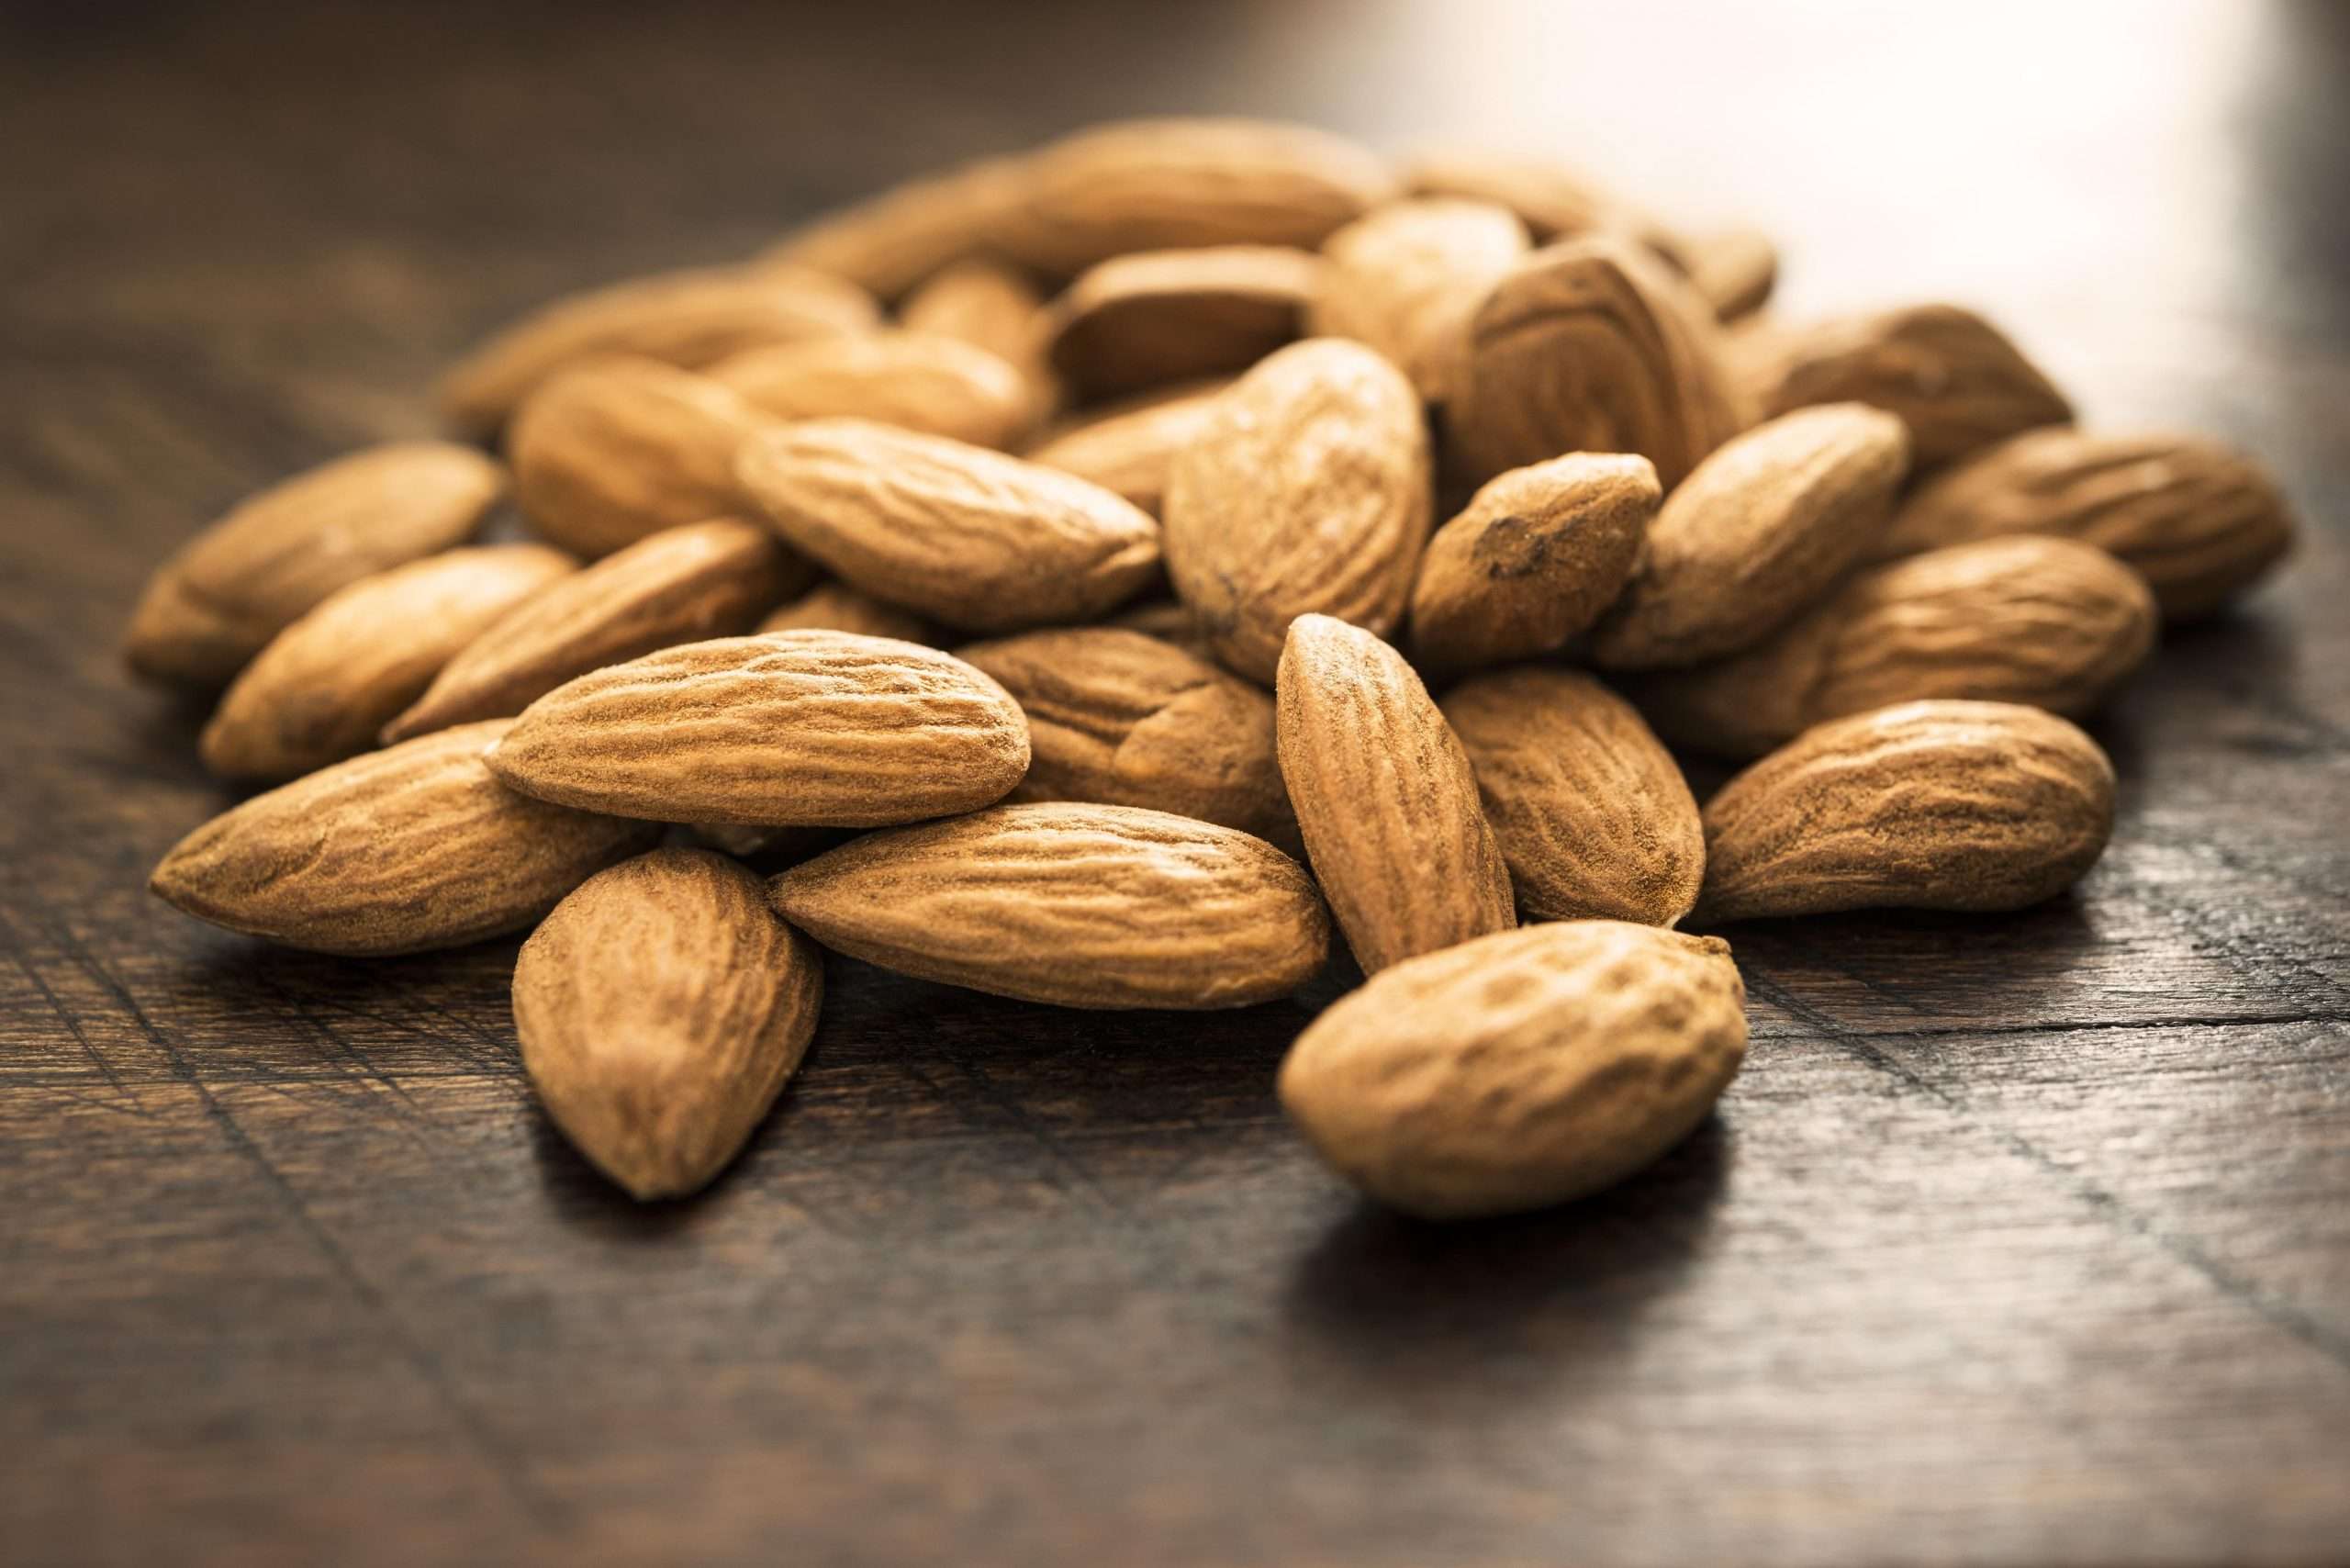 Eating Nuts to Help Lower Your Risk for Heart Disease